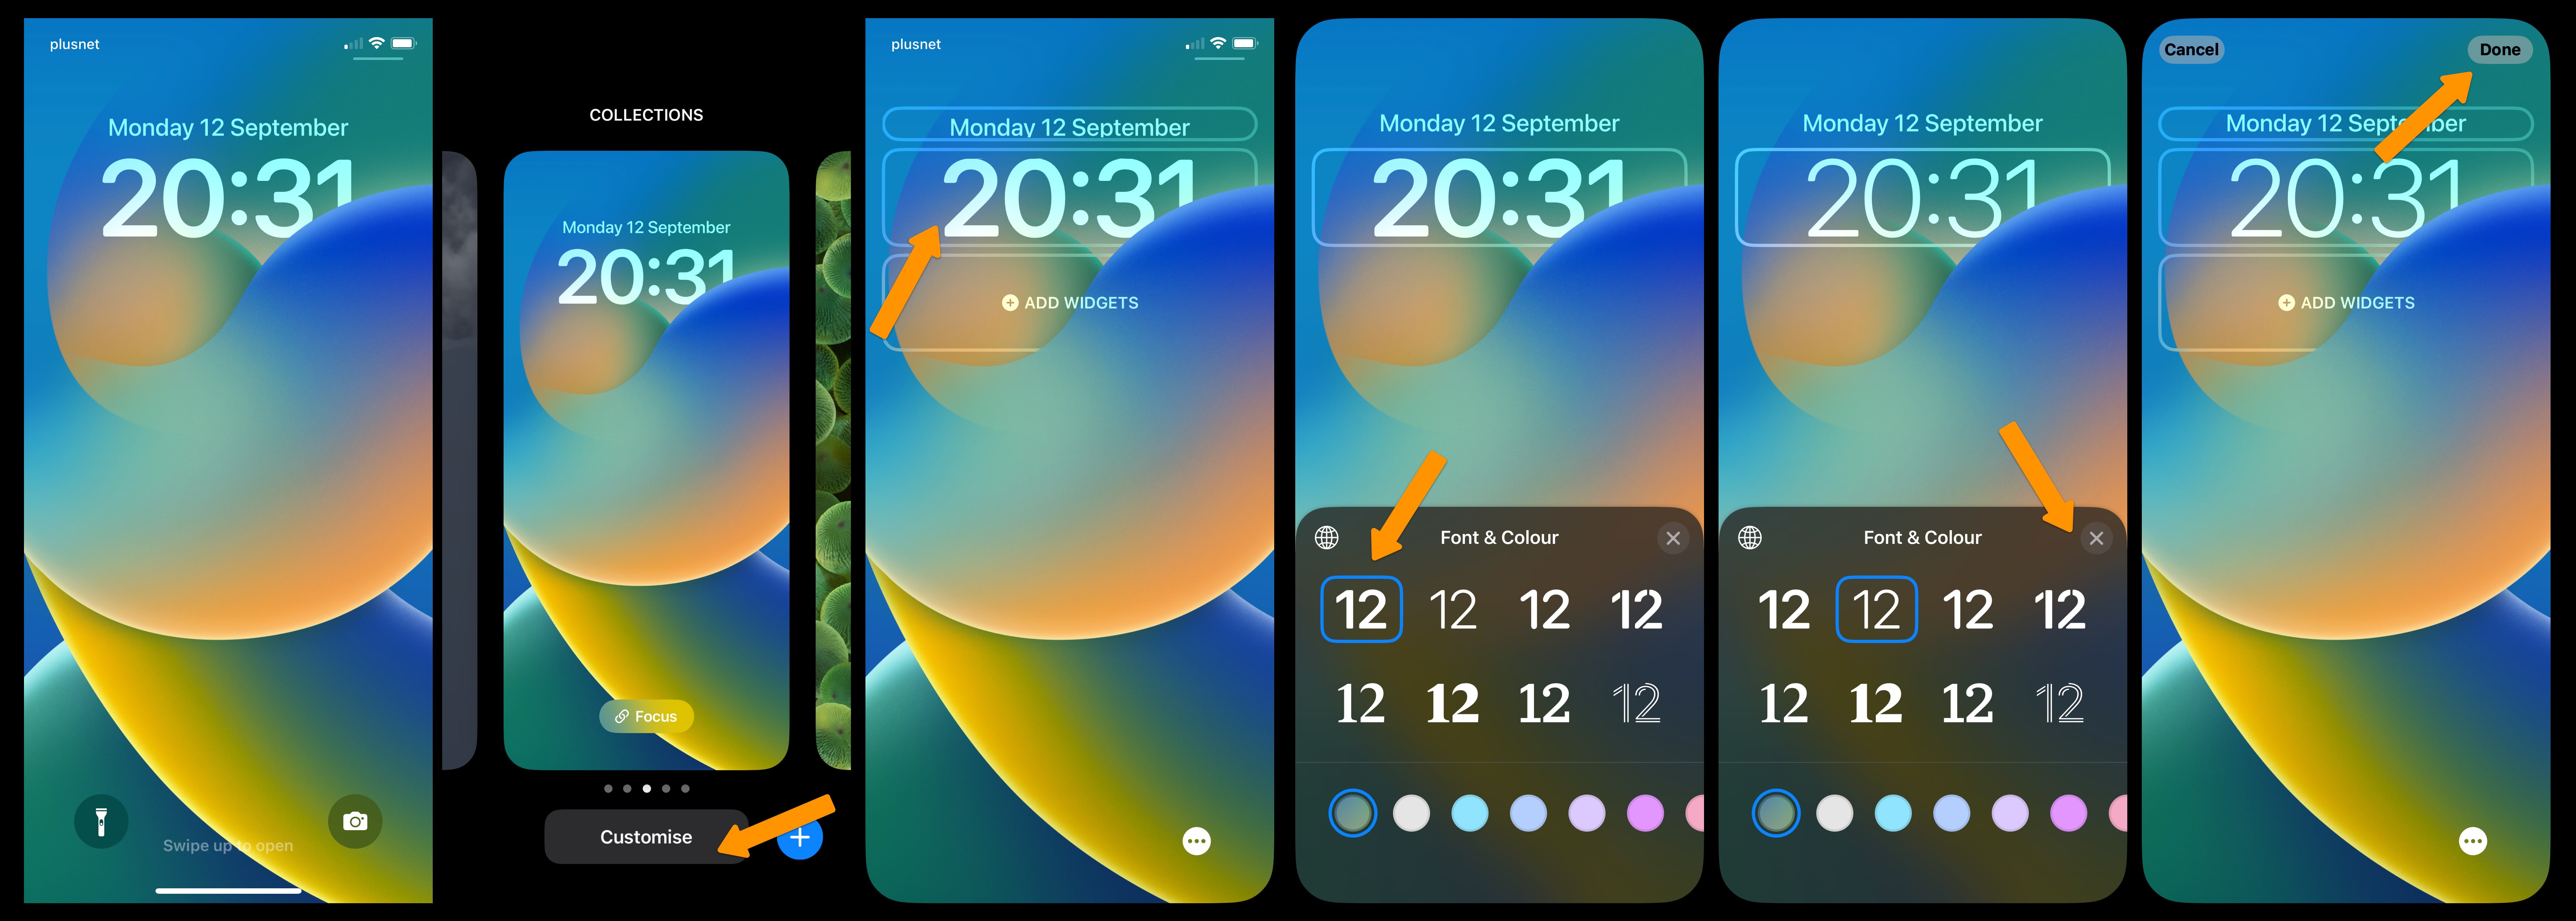 How to change iPhone time font on the iOS 16 lock screen